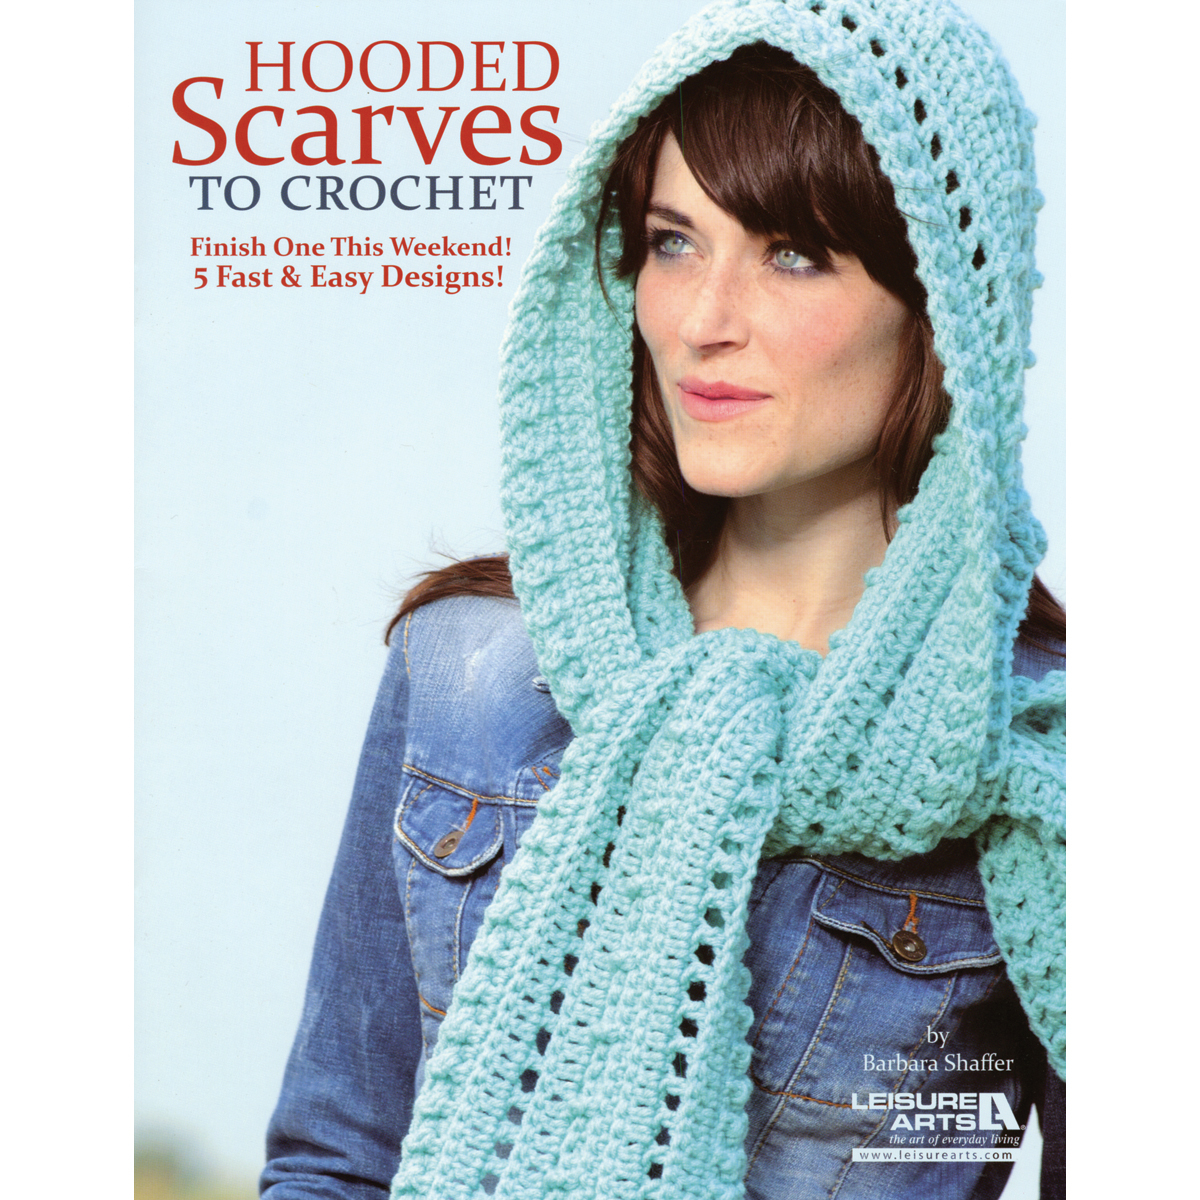 Knitted Hooded Scarf With Pockets Pattern Hooded Scarves